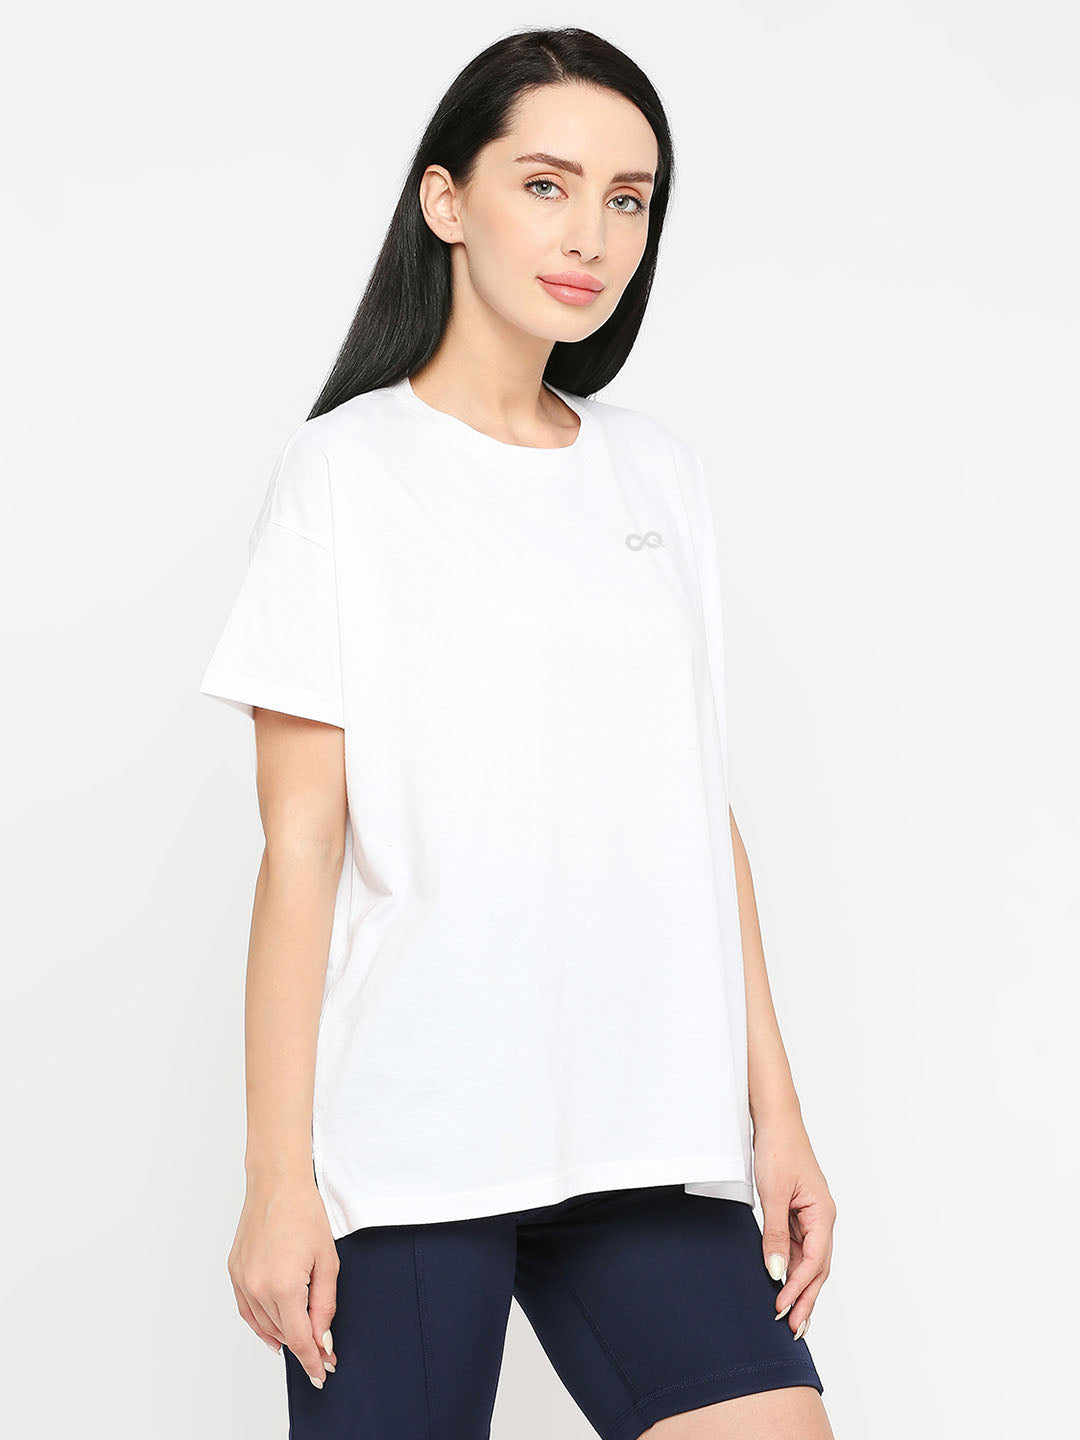 Women's White Oversized Sports T-Shirt - Stay Stylish and Comfortable